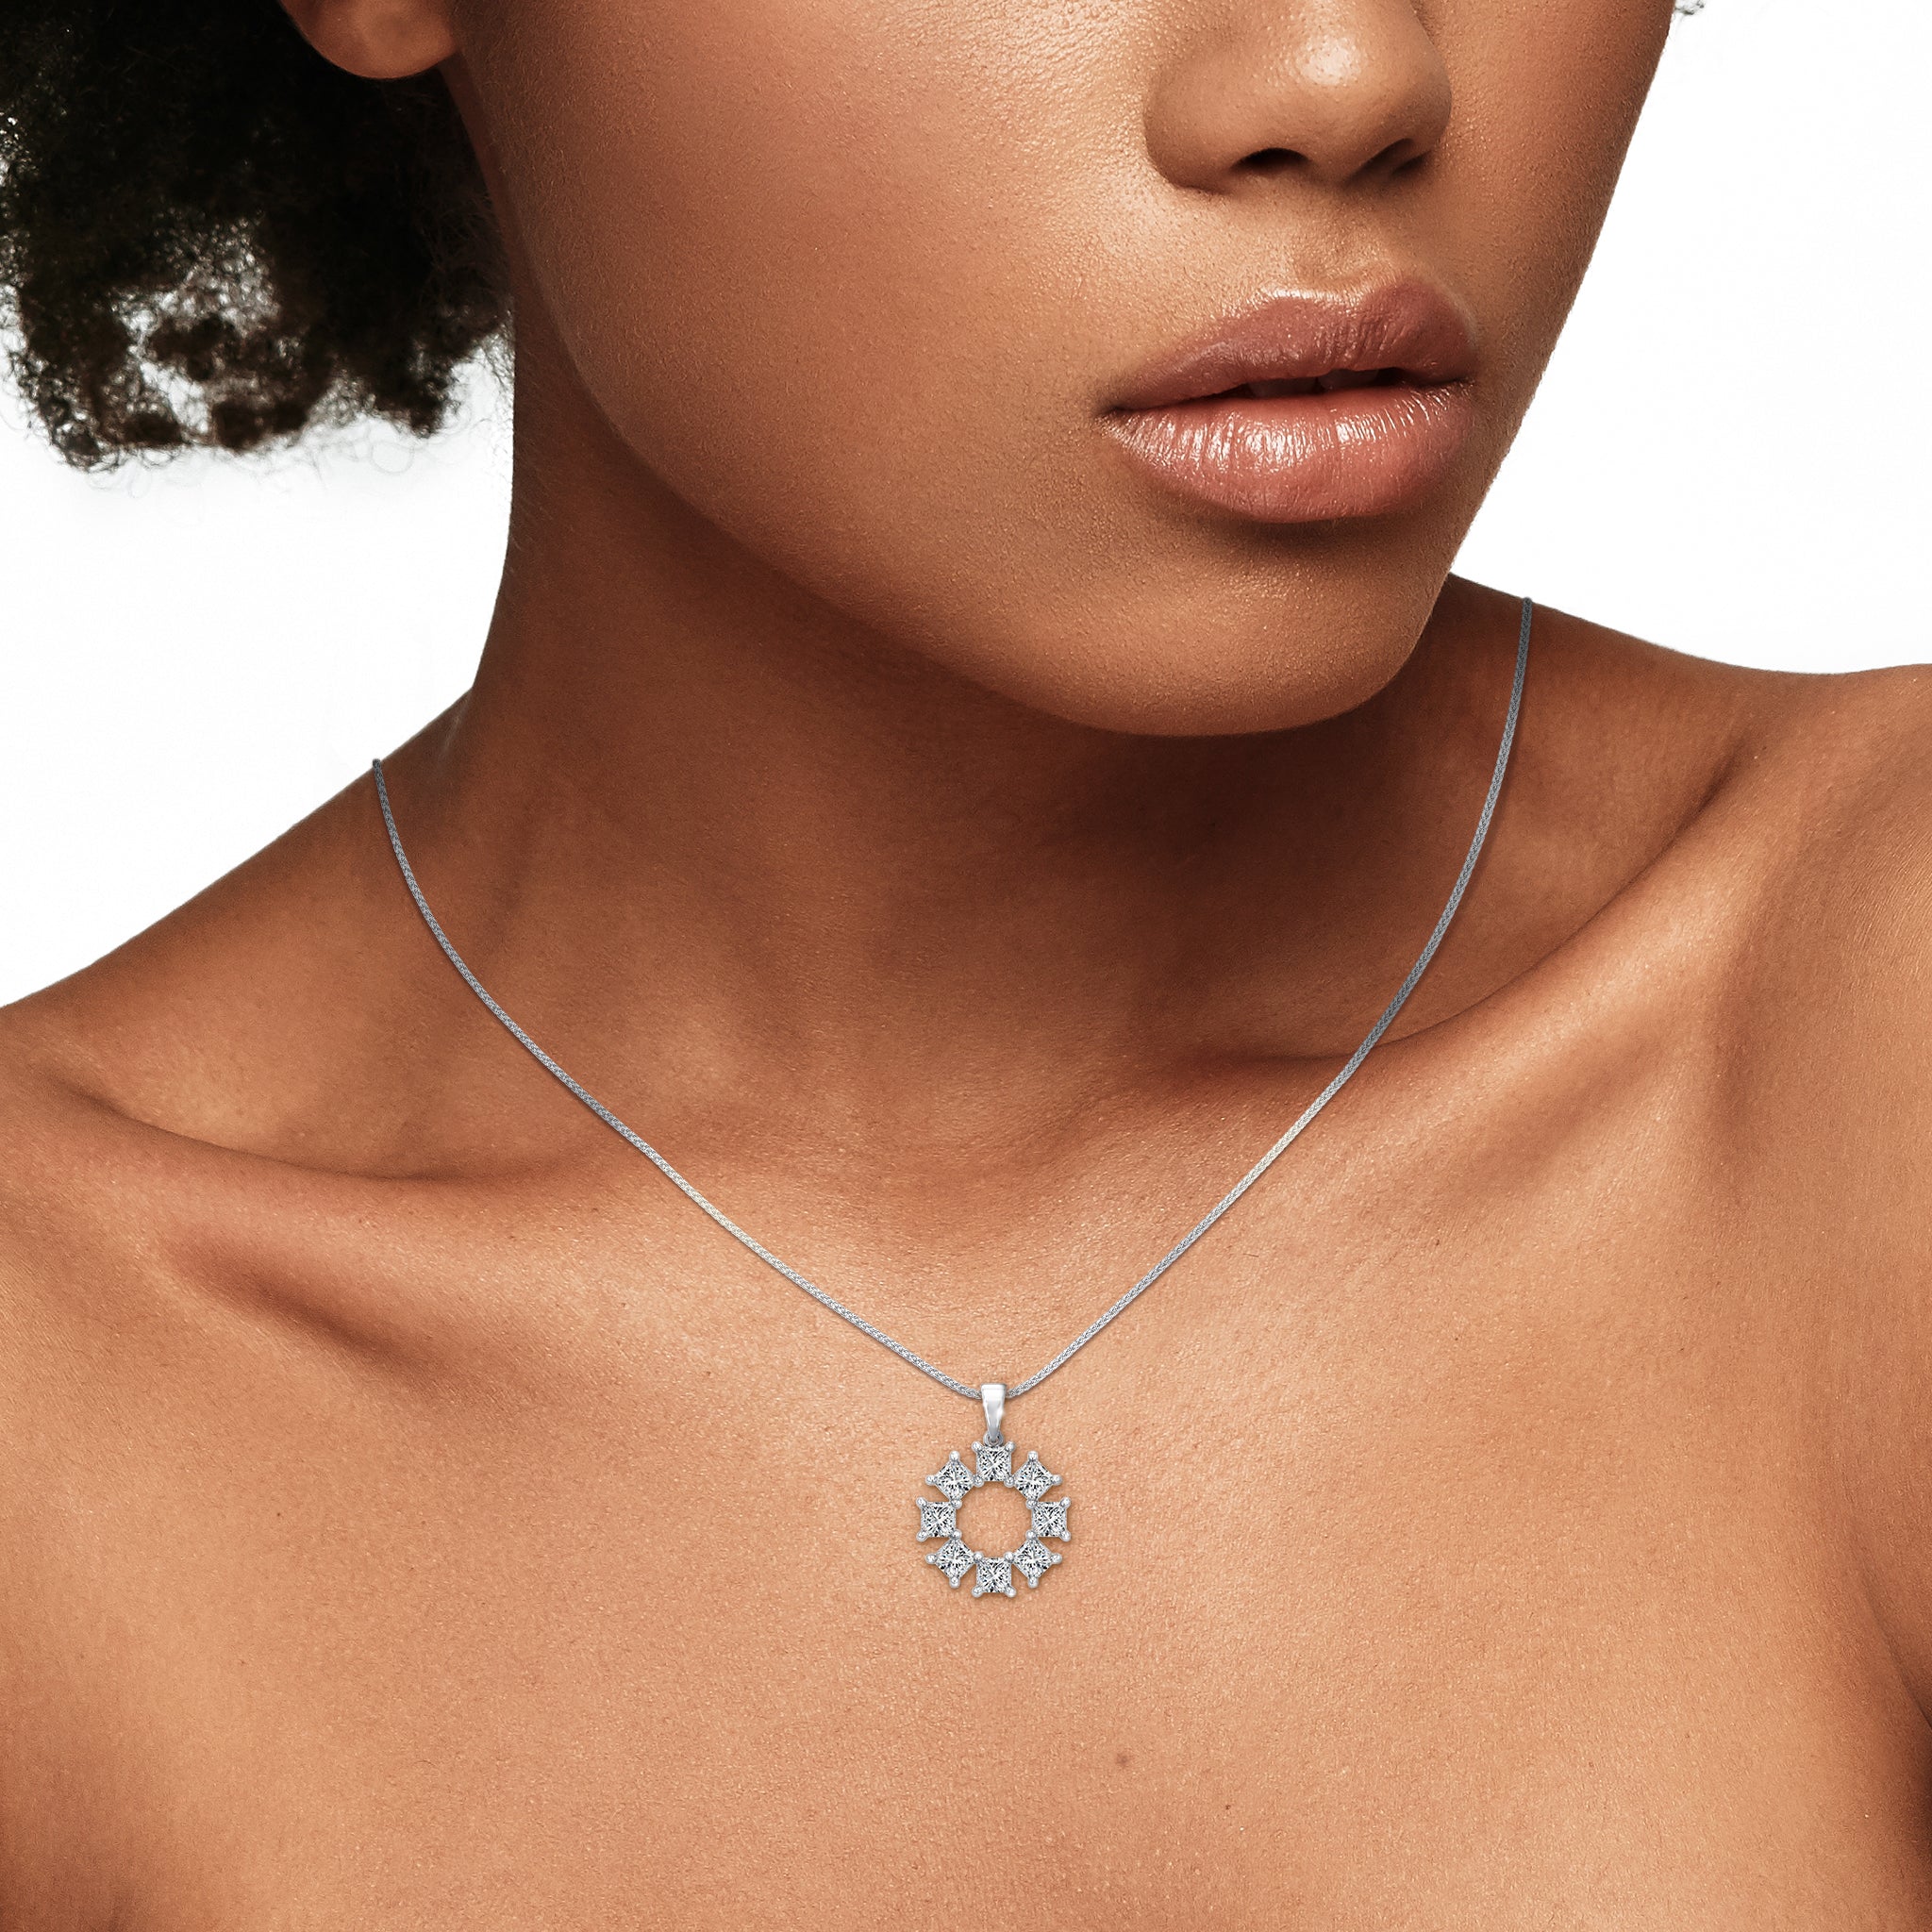 Shimansky - Women Wearing the My Girl Lucky 8 Diamond Pendant 1.00ct Crafted in 18K White Gold